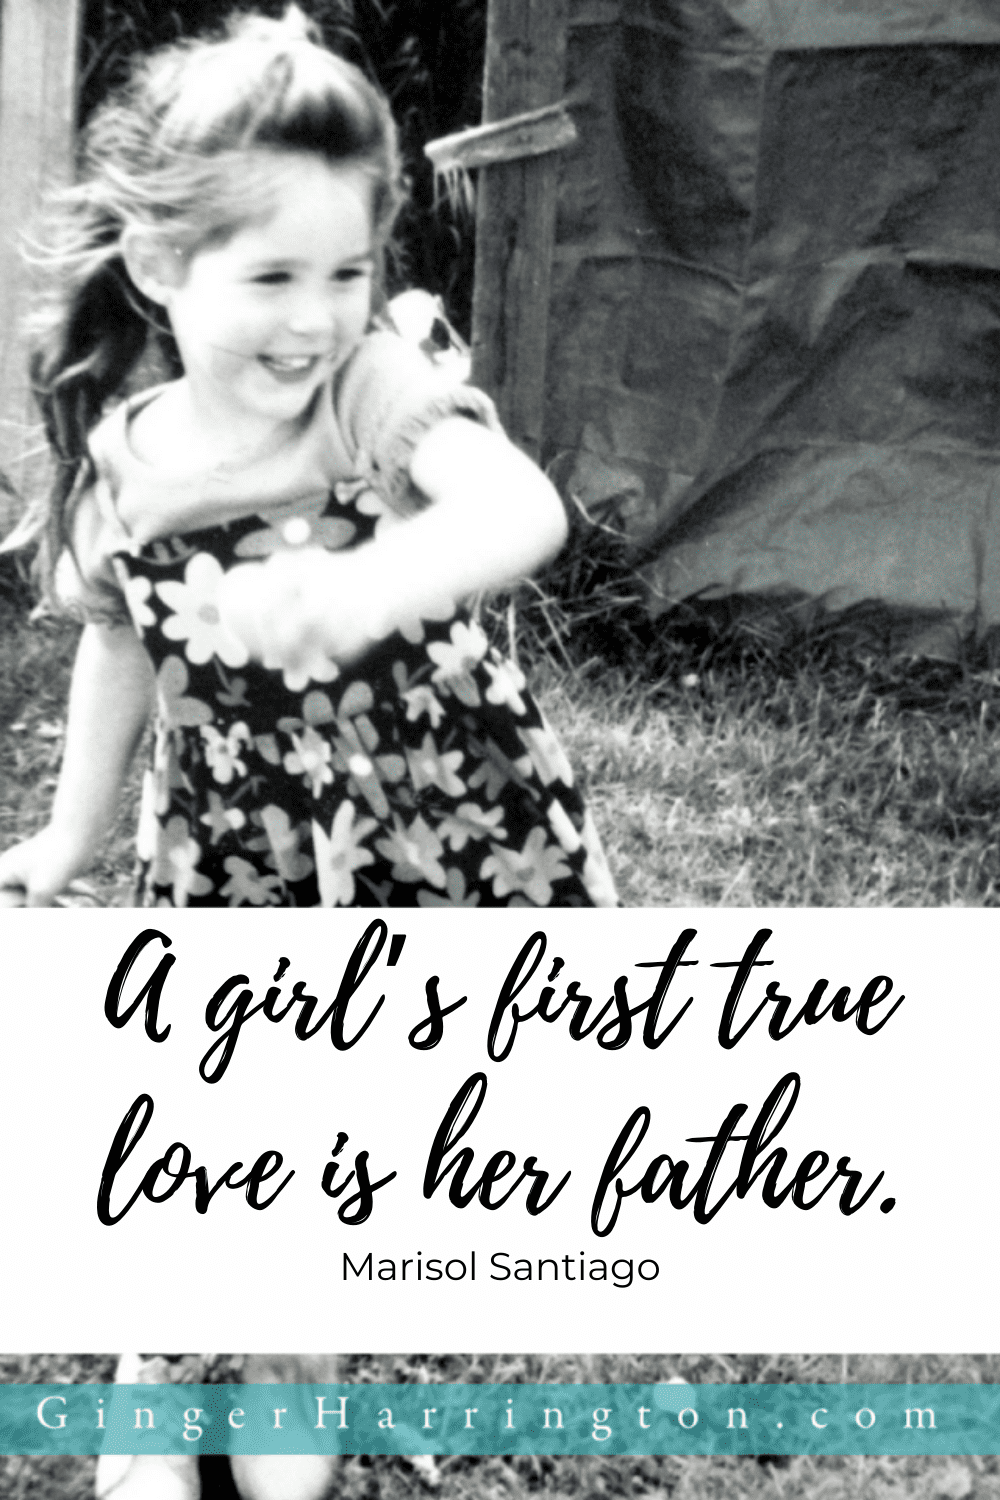 "A father is his daughter's first love." A father's legacy is built in the relationship he fosters with his kids. Get a free printable with 50 prayers for fathers. Support the father's in your life with prayer.